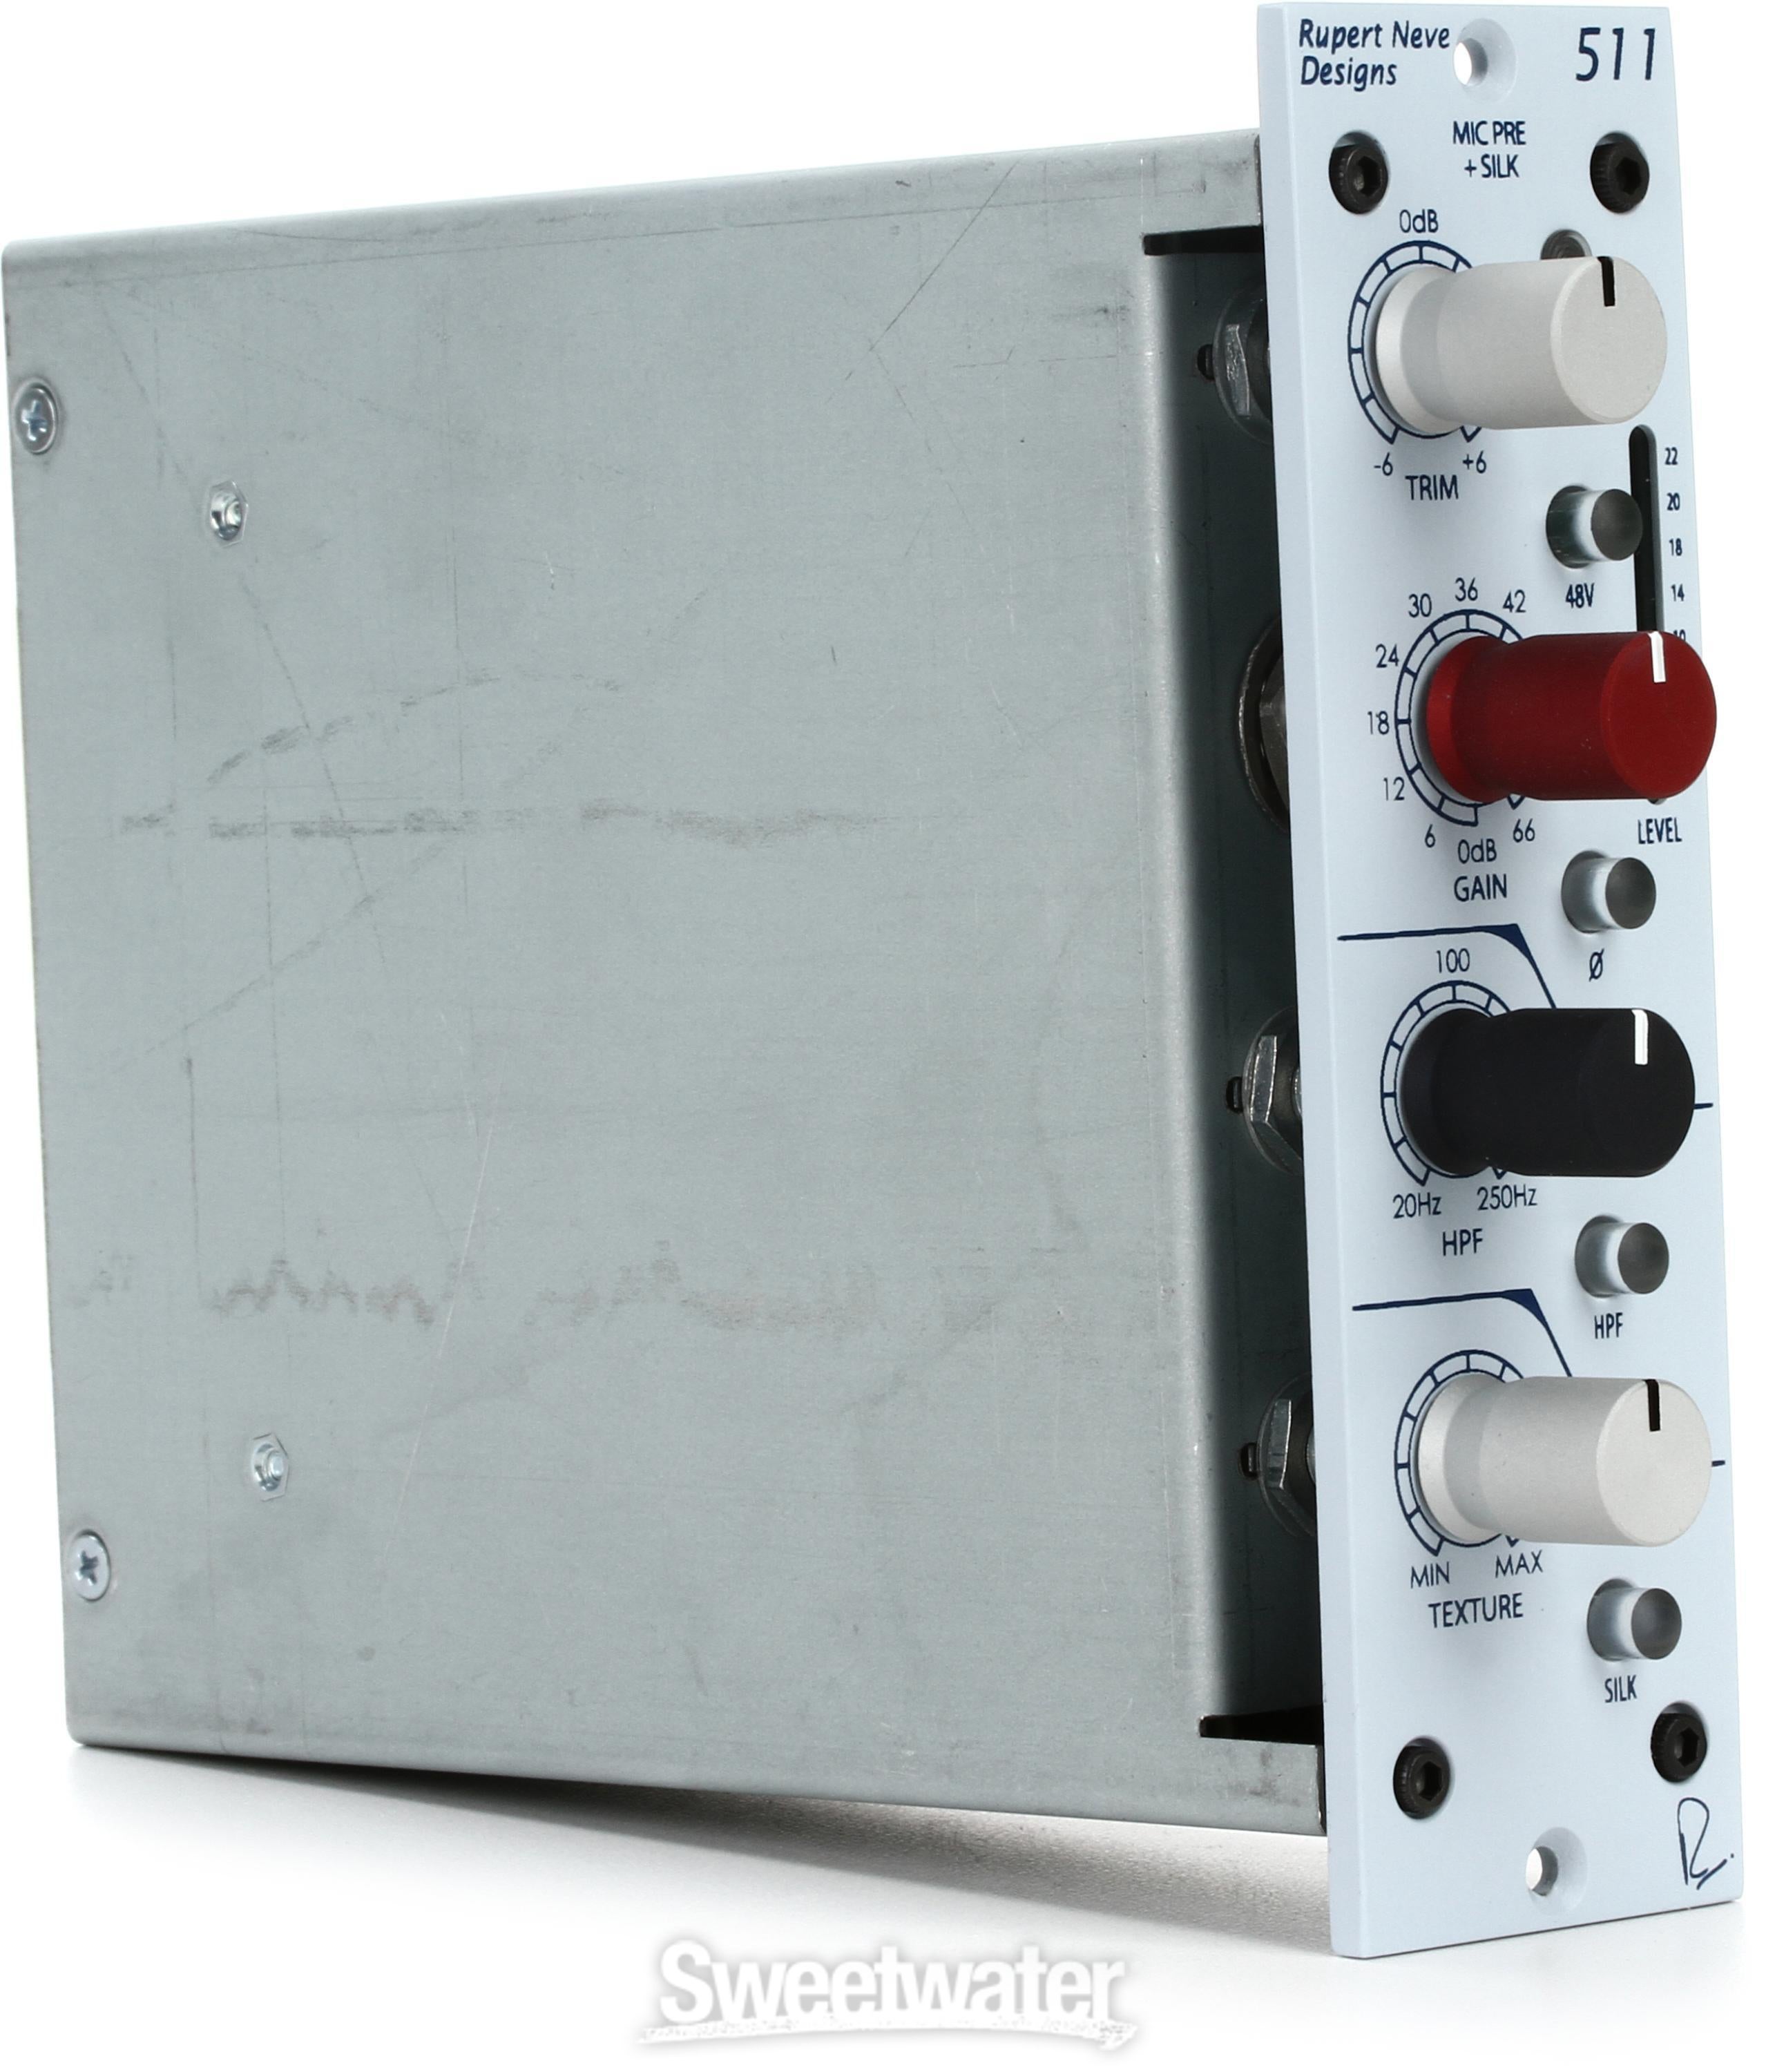 Rupert Neve Designs 511 500 Series Microphone Preamp | Sweetwater